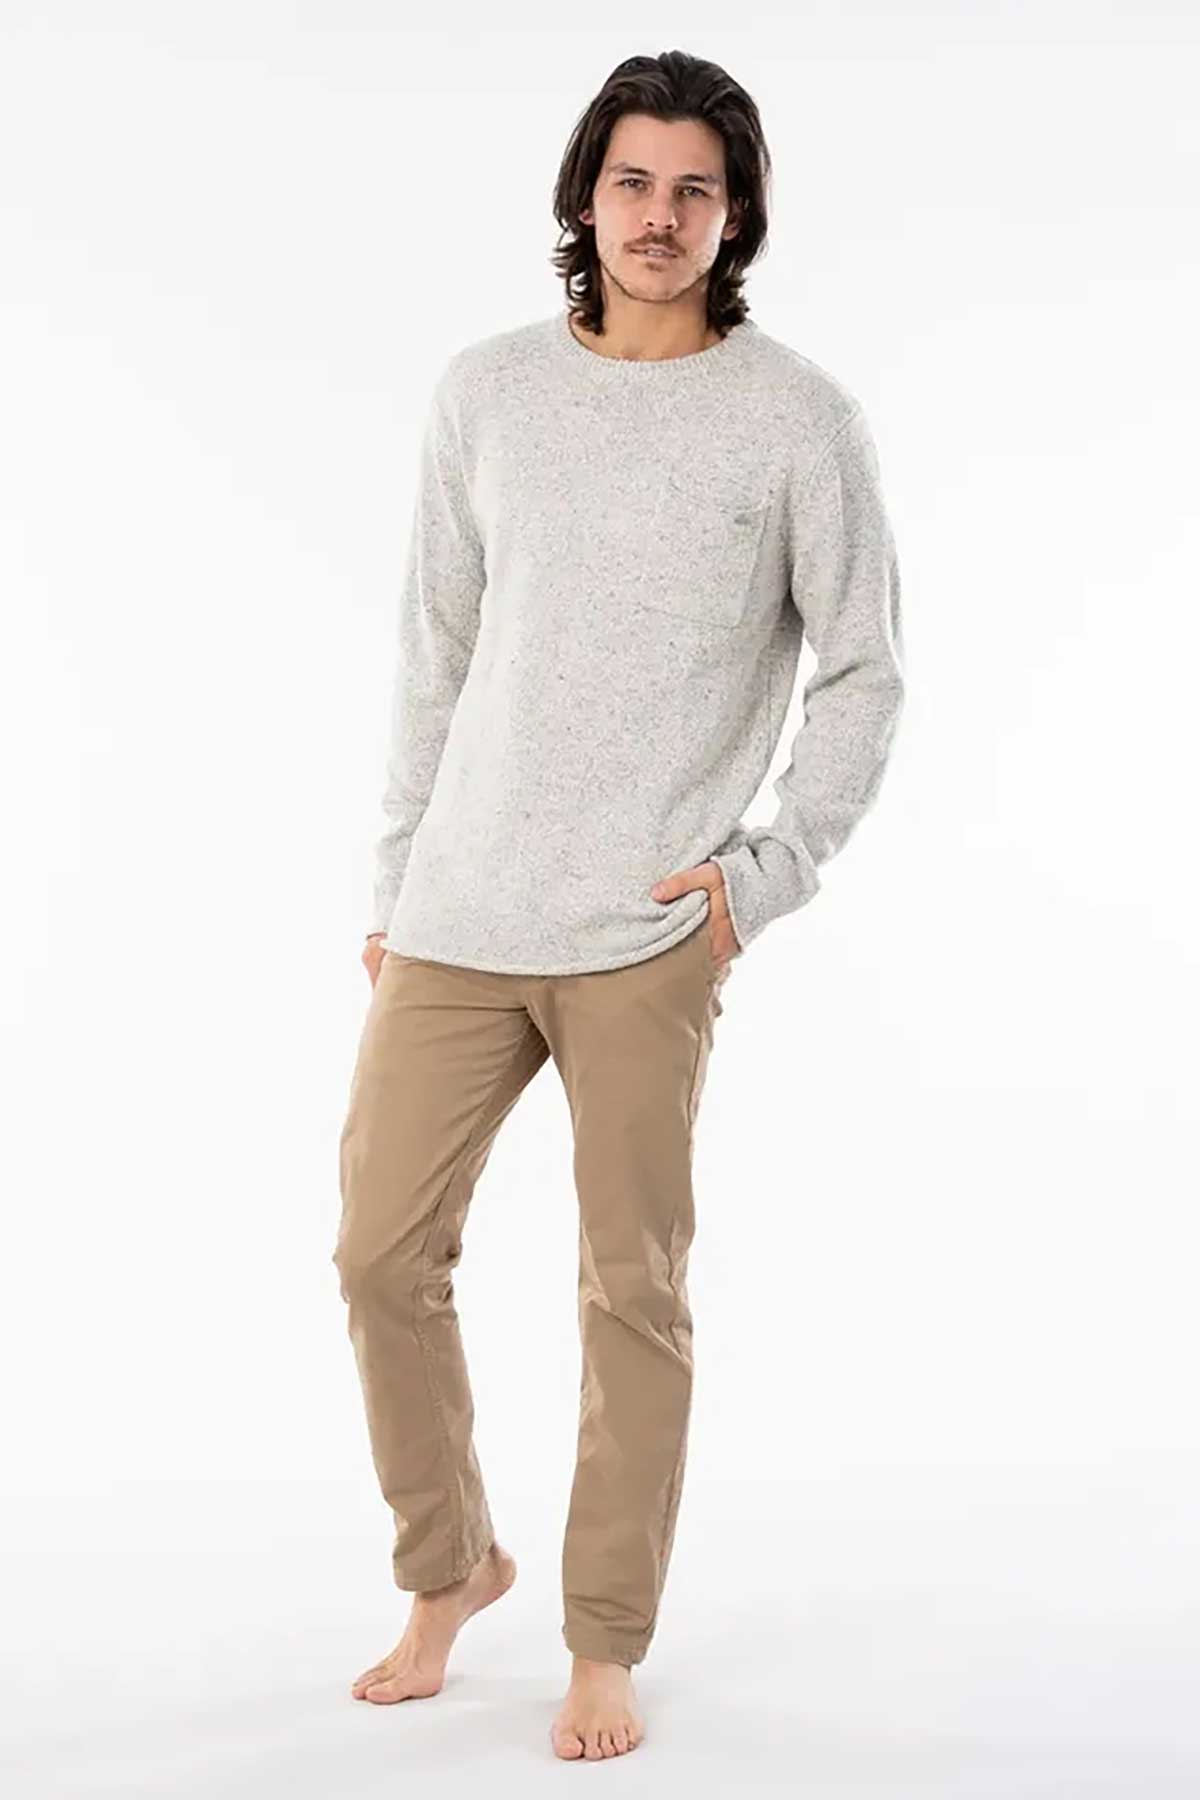 Rip Curl Knit Sweater - Neps Crew, textured knit.